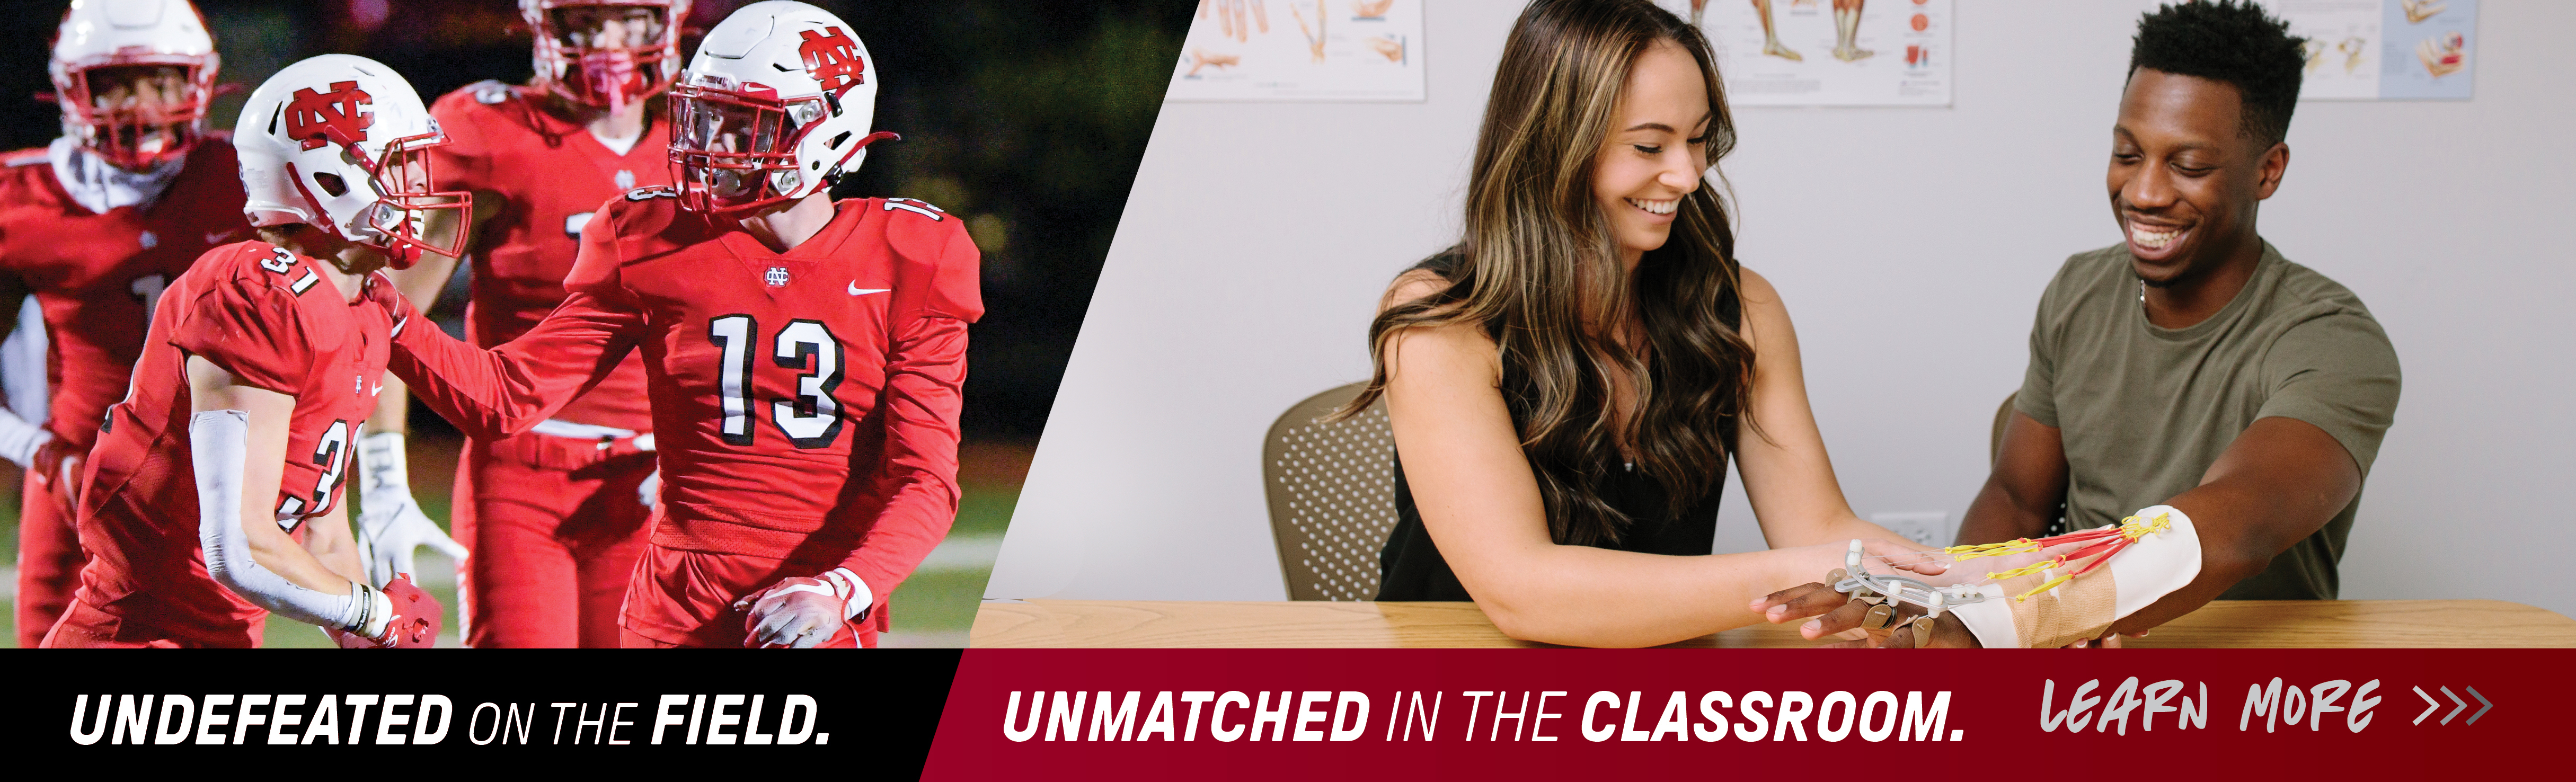 Undefeated on the field, unmatched in the classroom.